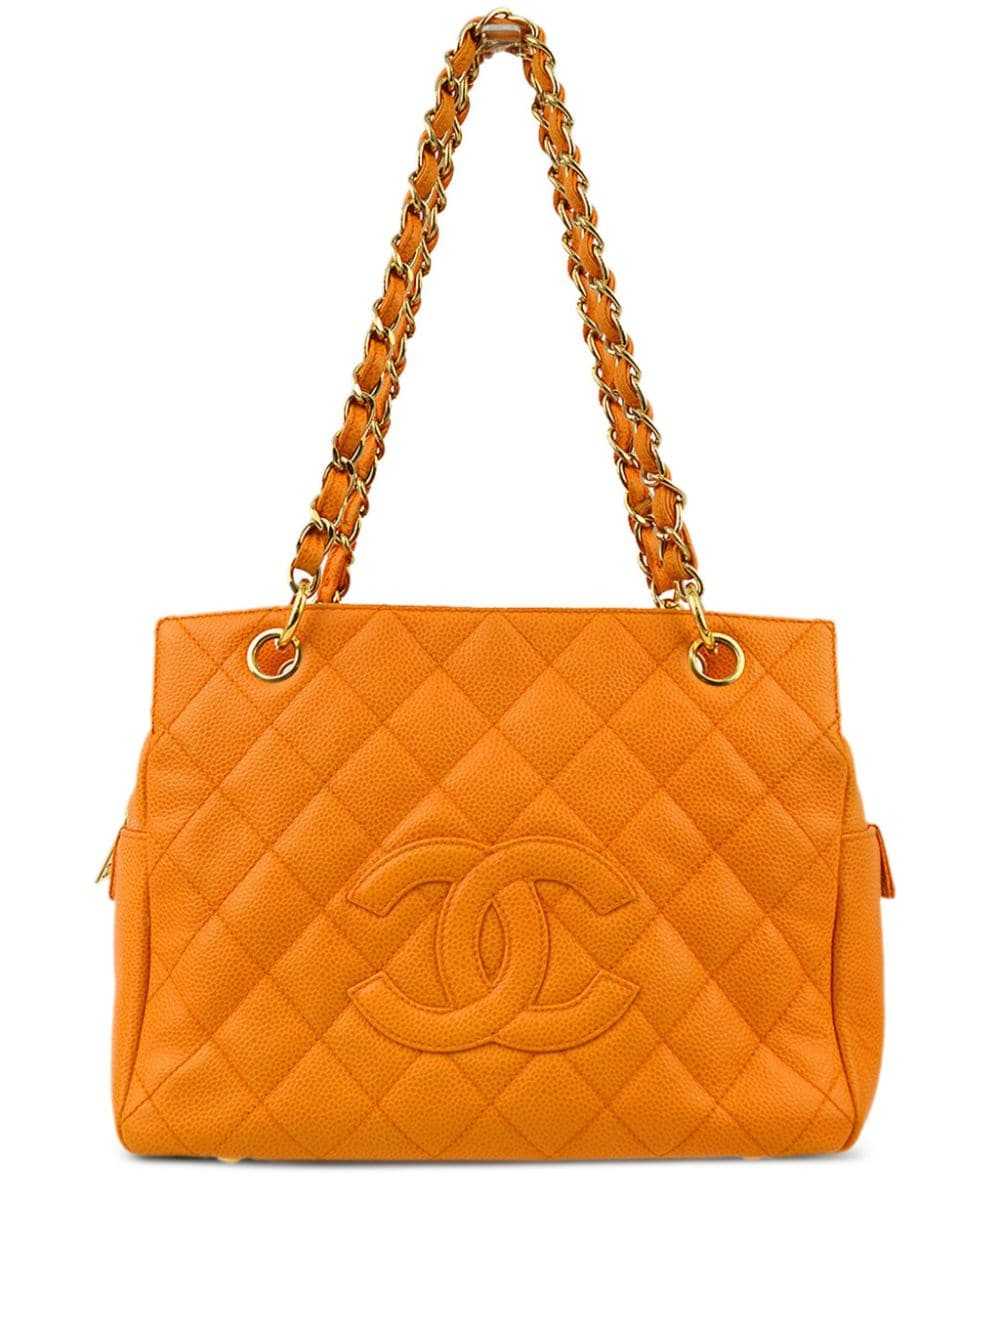 CHANEL Pre-Owned 2003 Petite Timeless tote bag - … - image 1